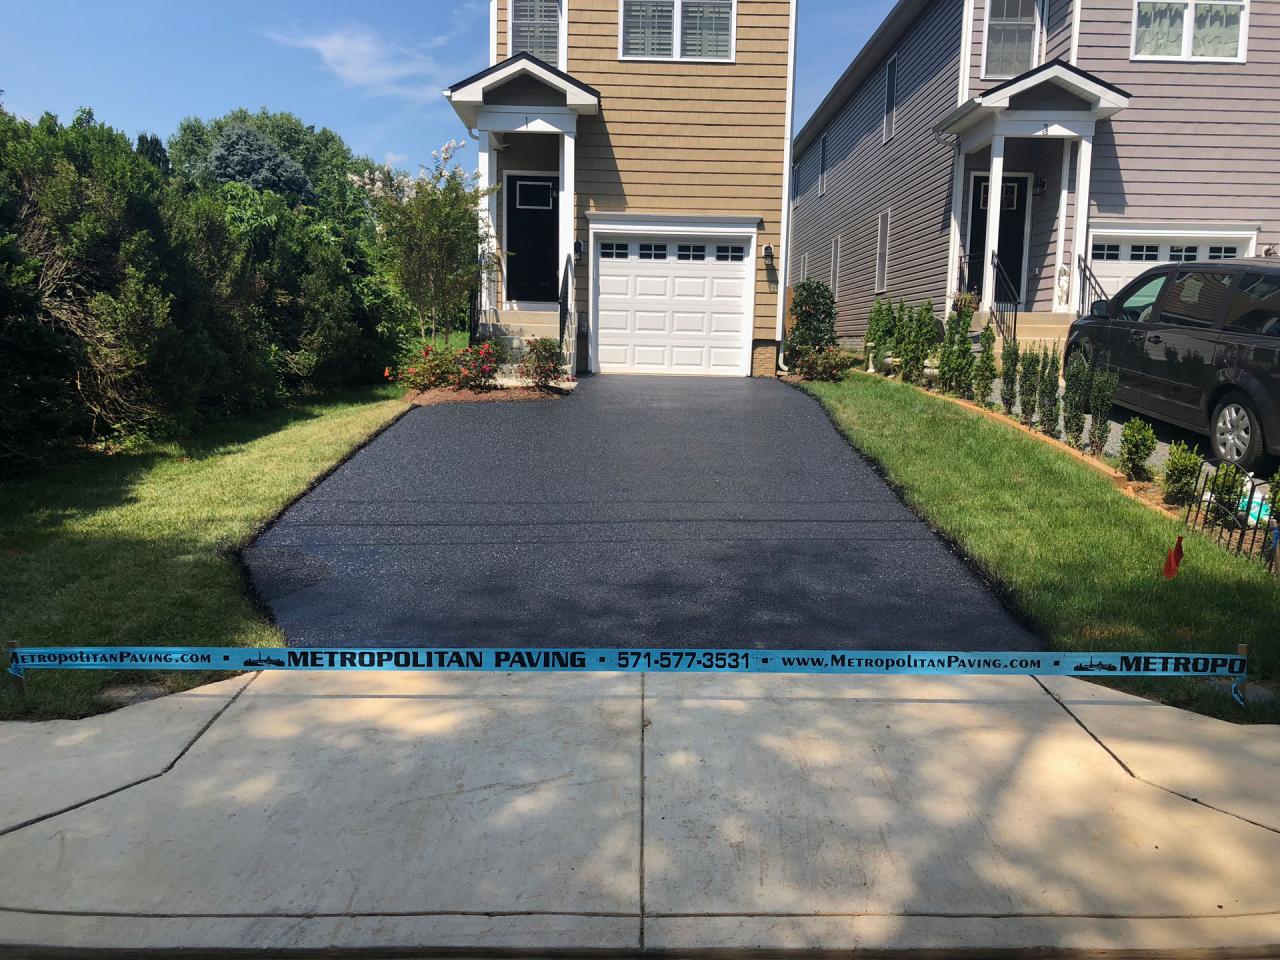 Driveway Sealing Adds Value